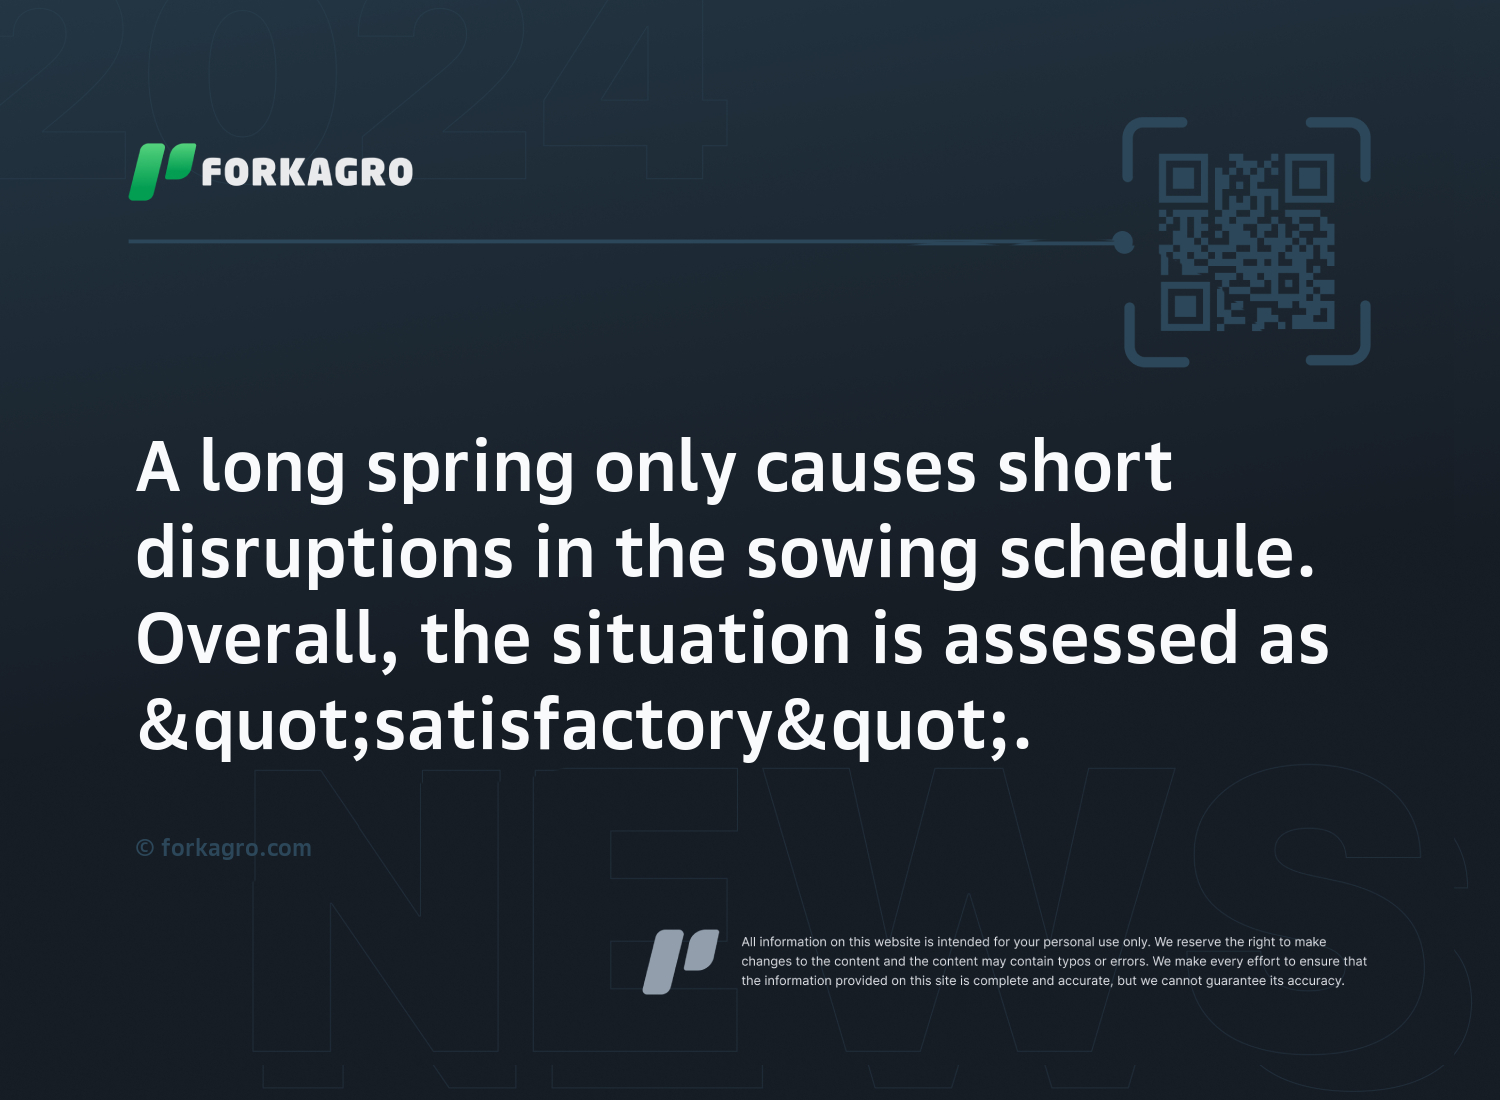 A long spring only causes short disruptions in the sowing schedule. Overall, the situation is assessed as "satisfactory".